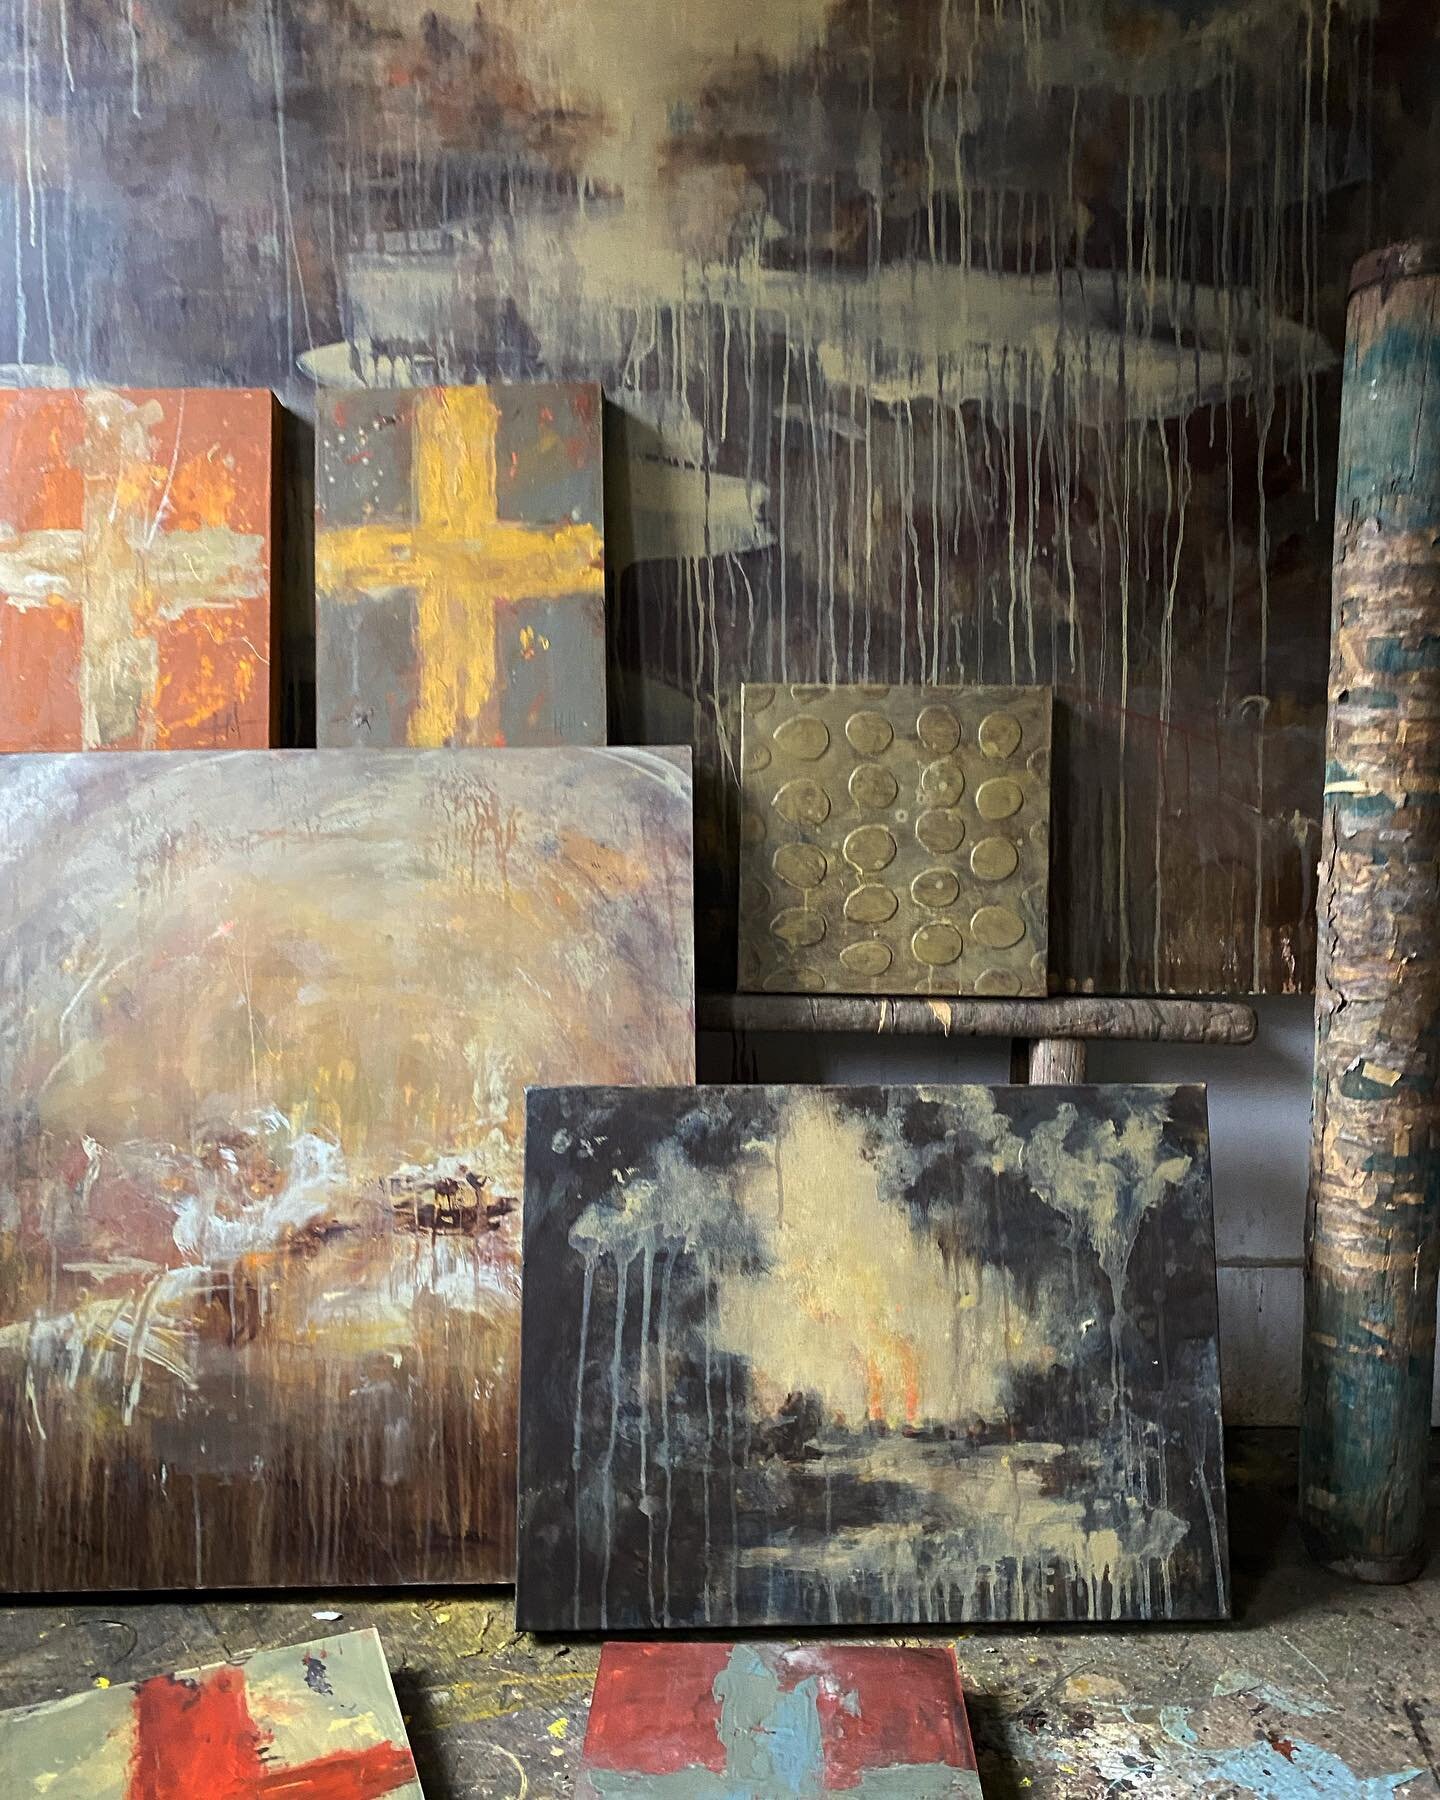 Small works and studies available on my website at noon today, eastern. These studies are connected to the larger paintings shown in Nashville in October. Like little siblings, these smaller surfaces, mostly on wood panel, are where the ideas and col